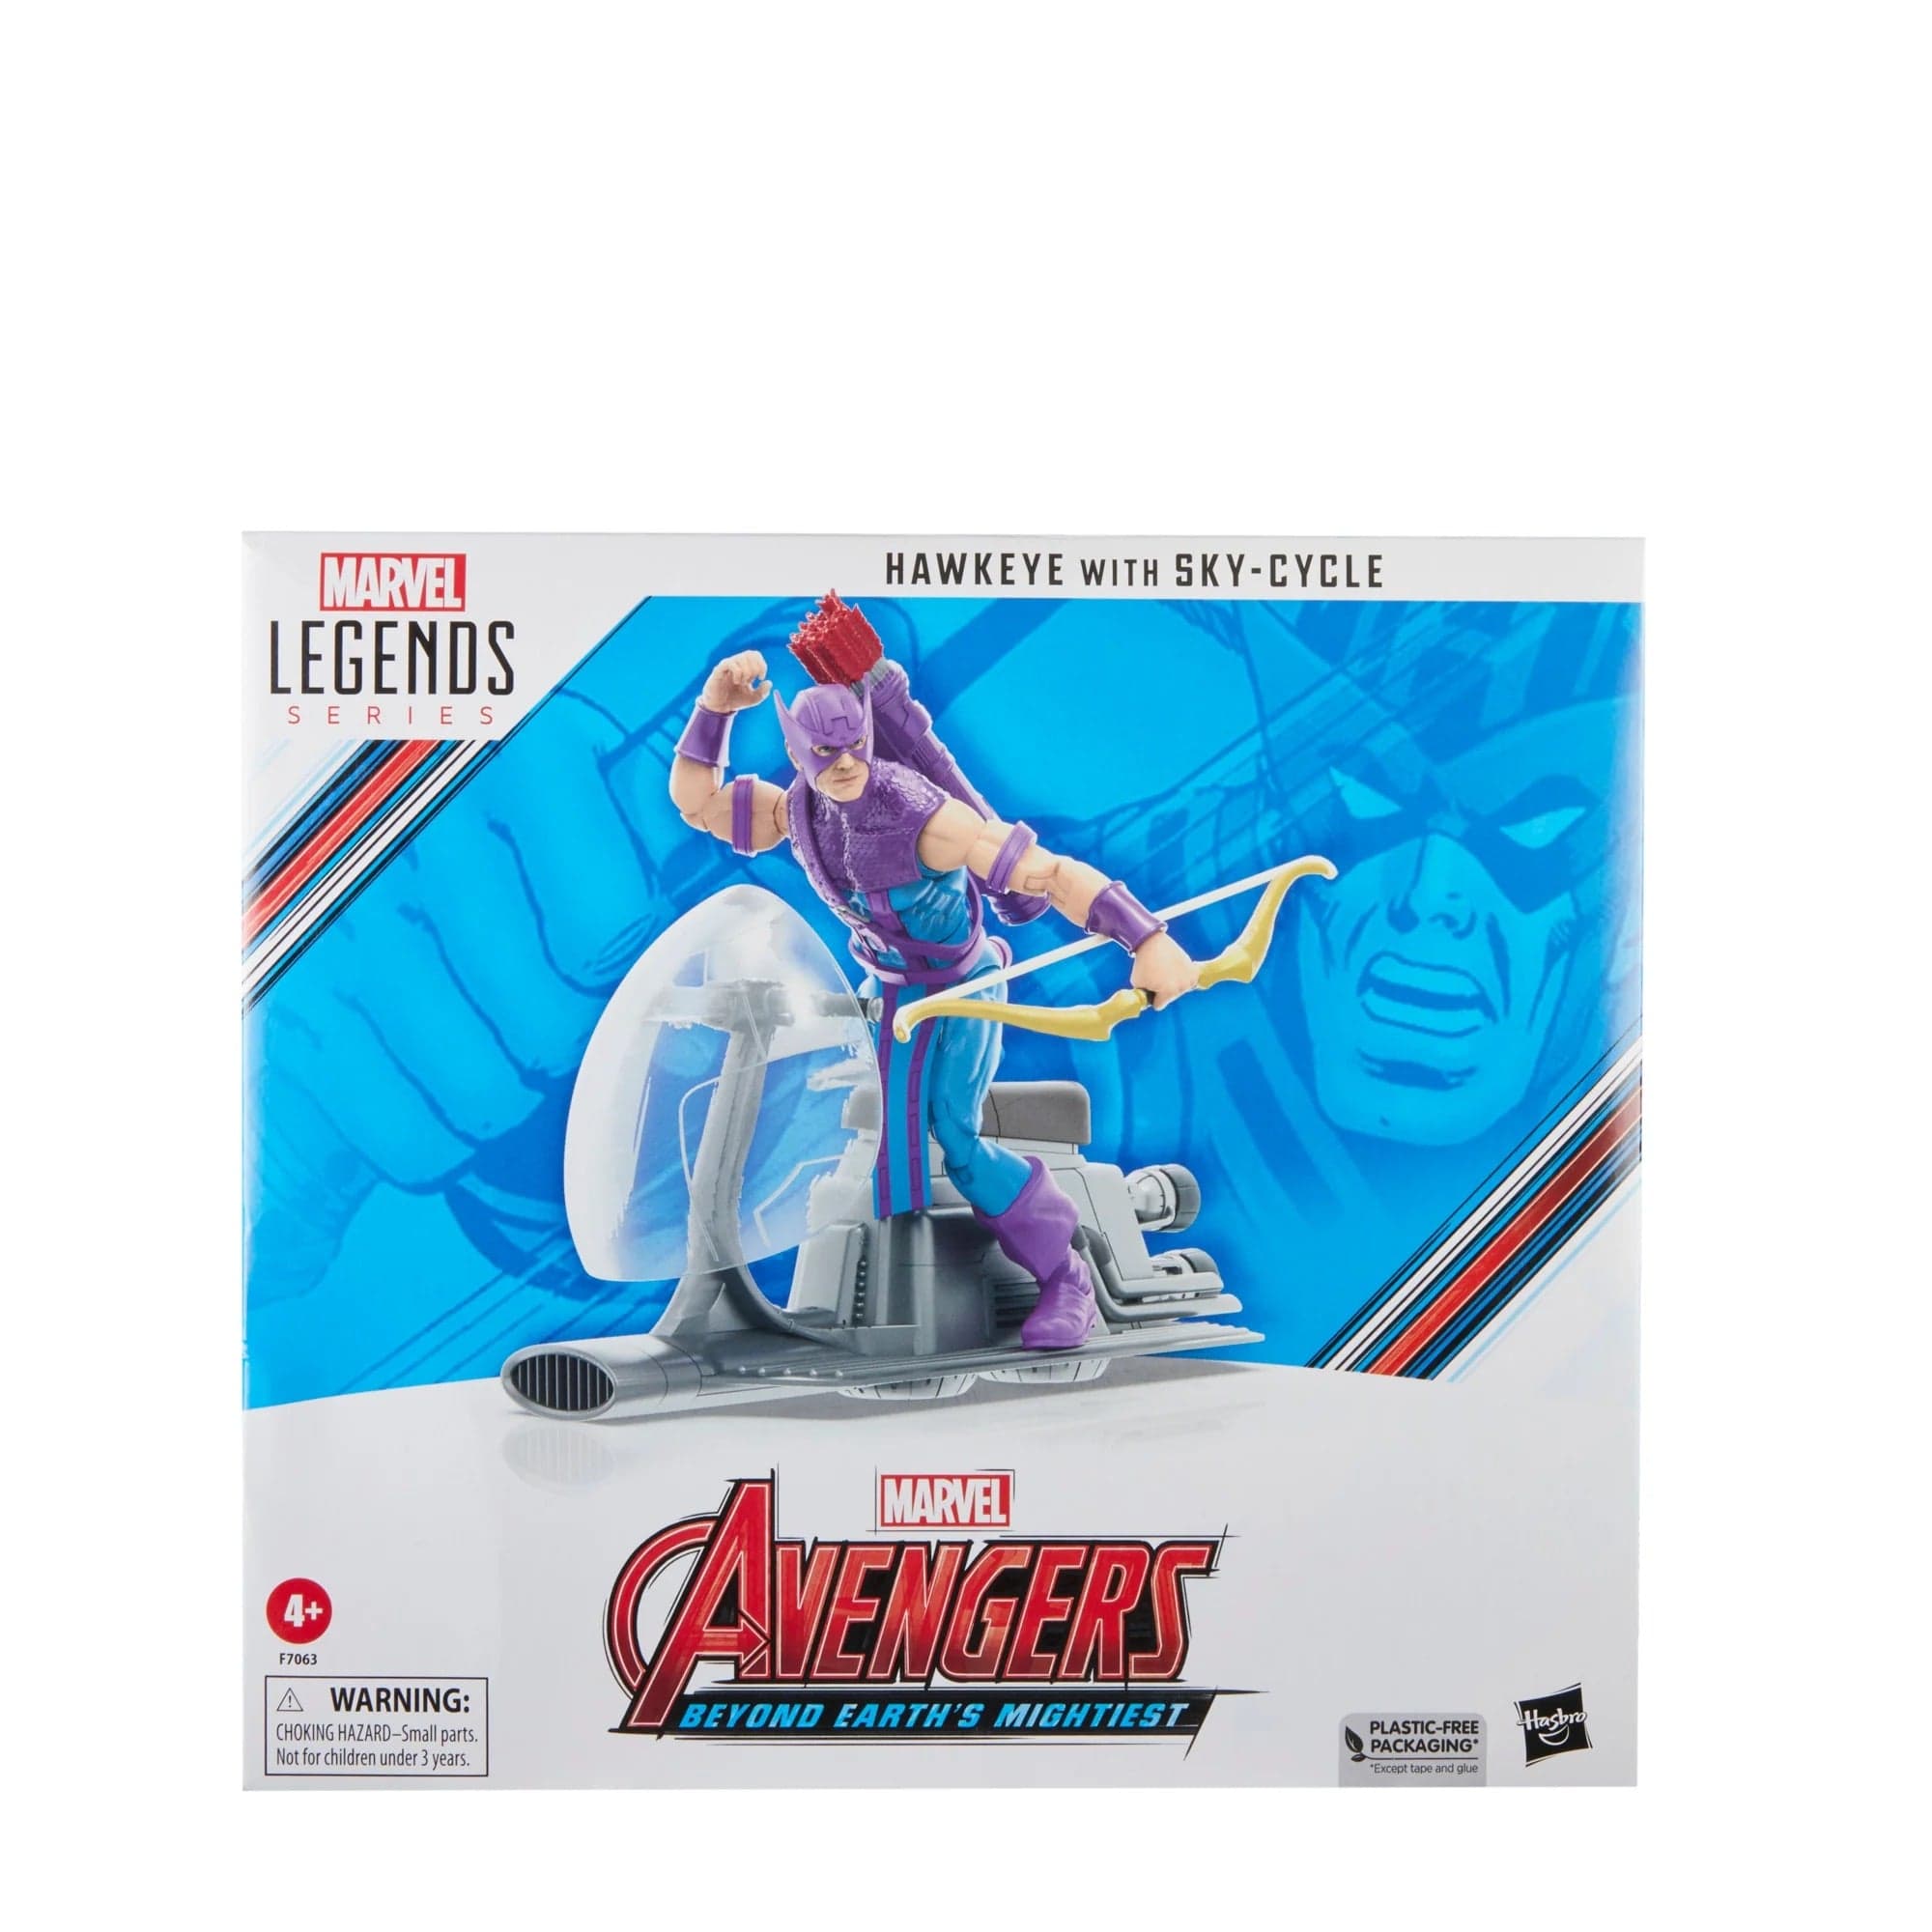 Hasbro Marvel Legends Avengers 60th Anniversary Hawkeye with Sky-Cycle Action Figure Set